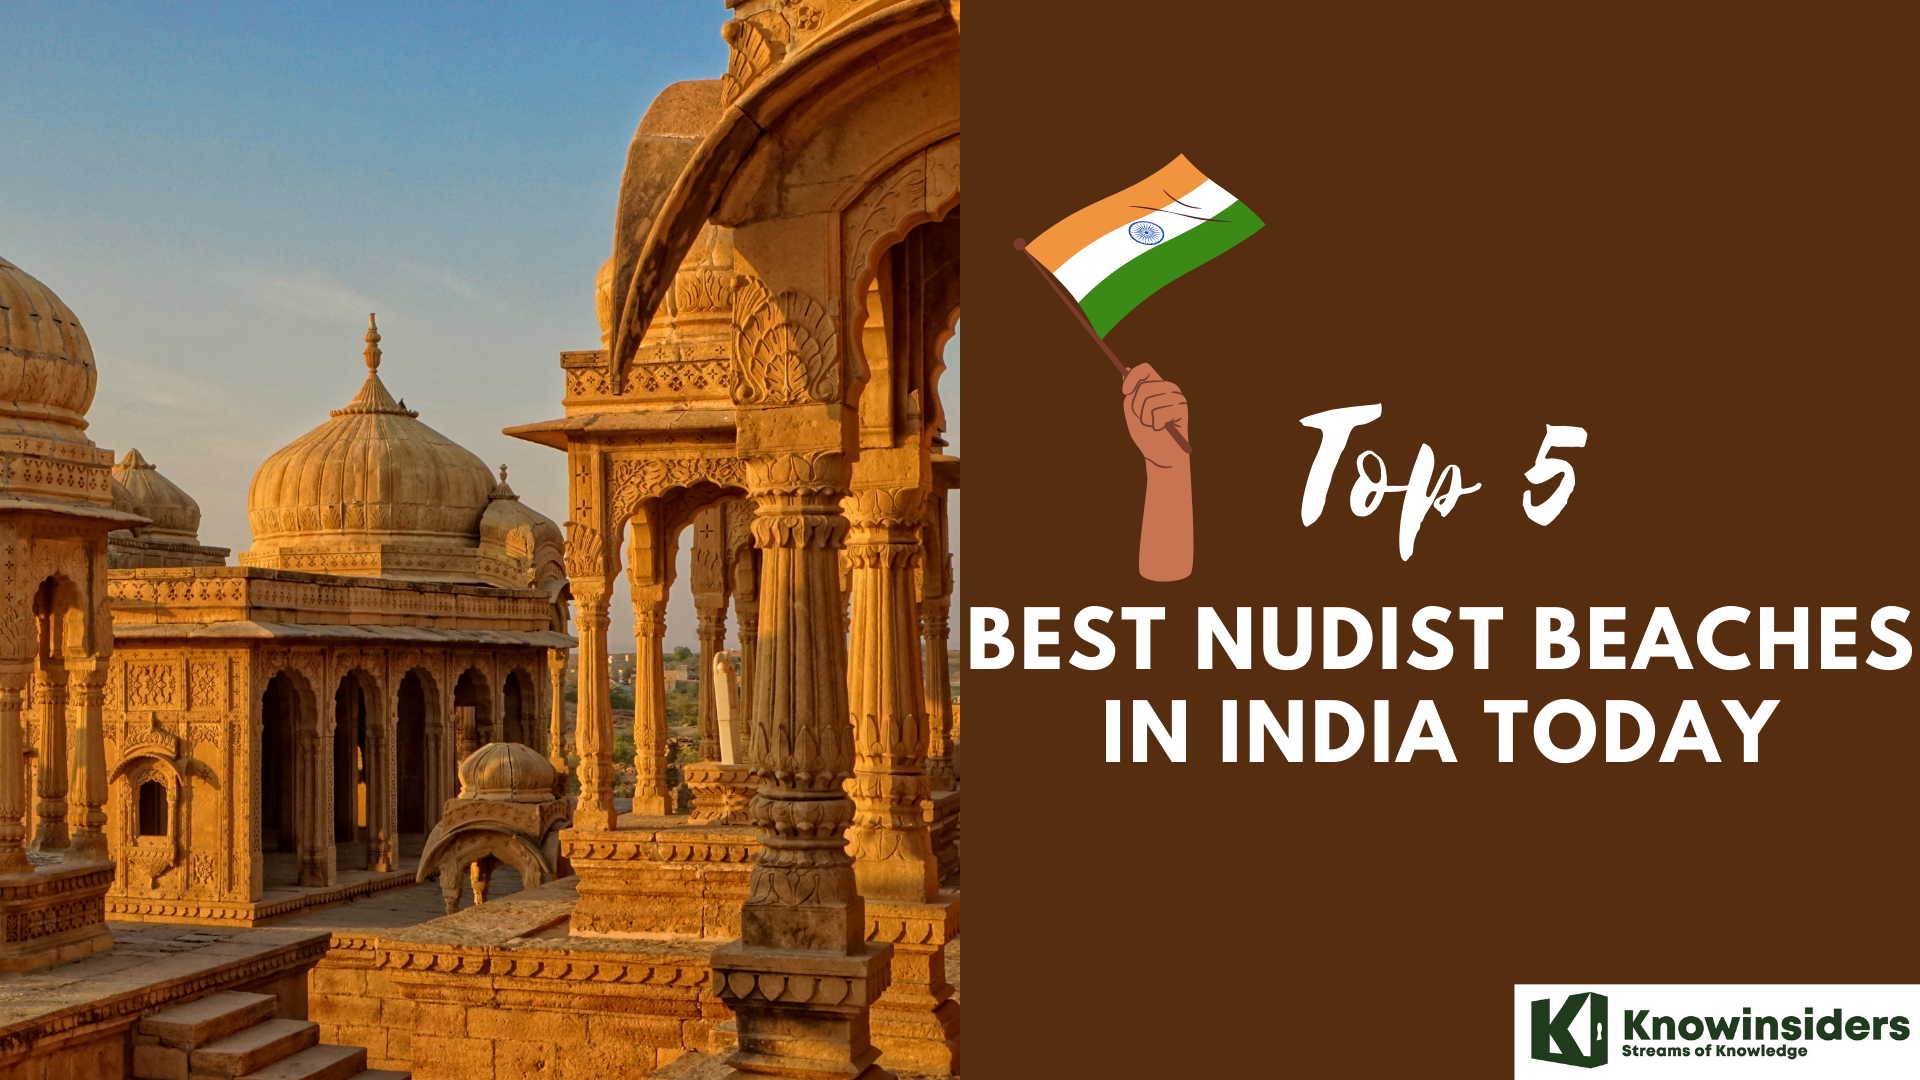 Top 5 Best Nude Beaches in India Where You Can Embrace Body